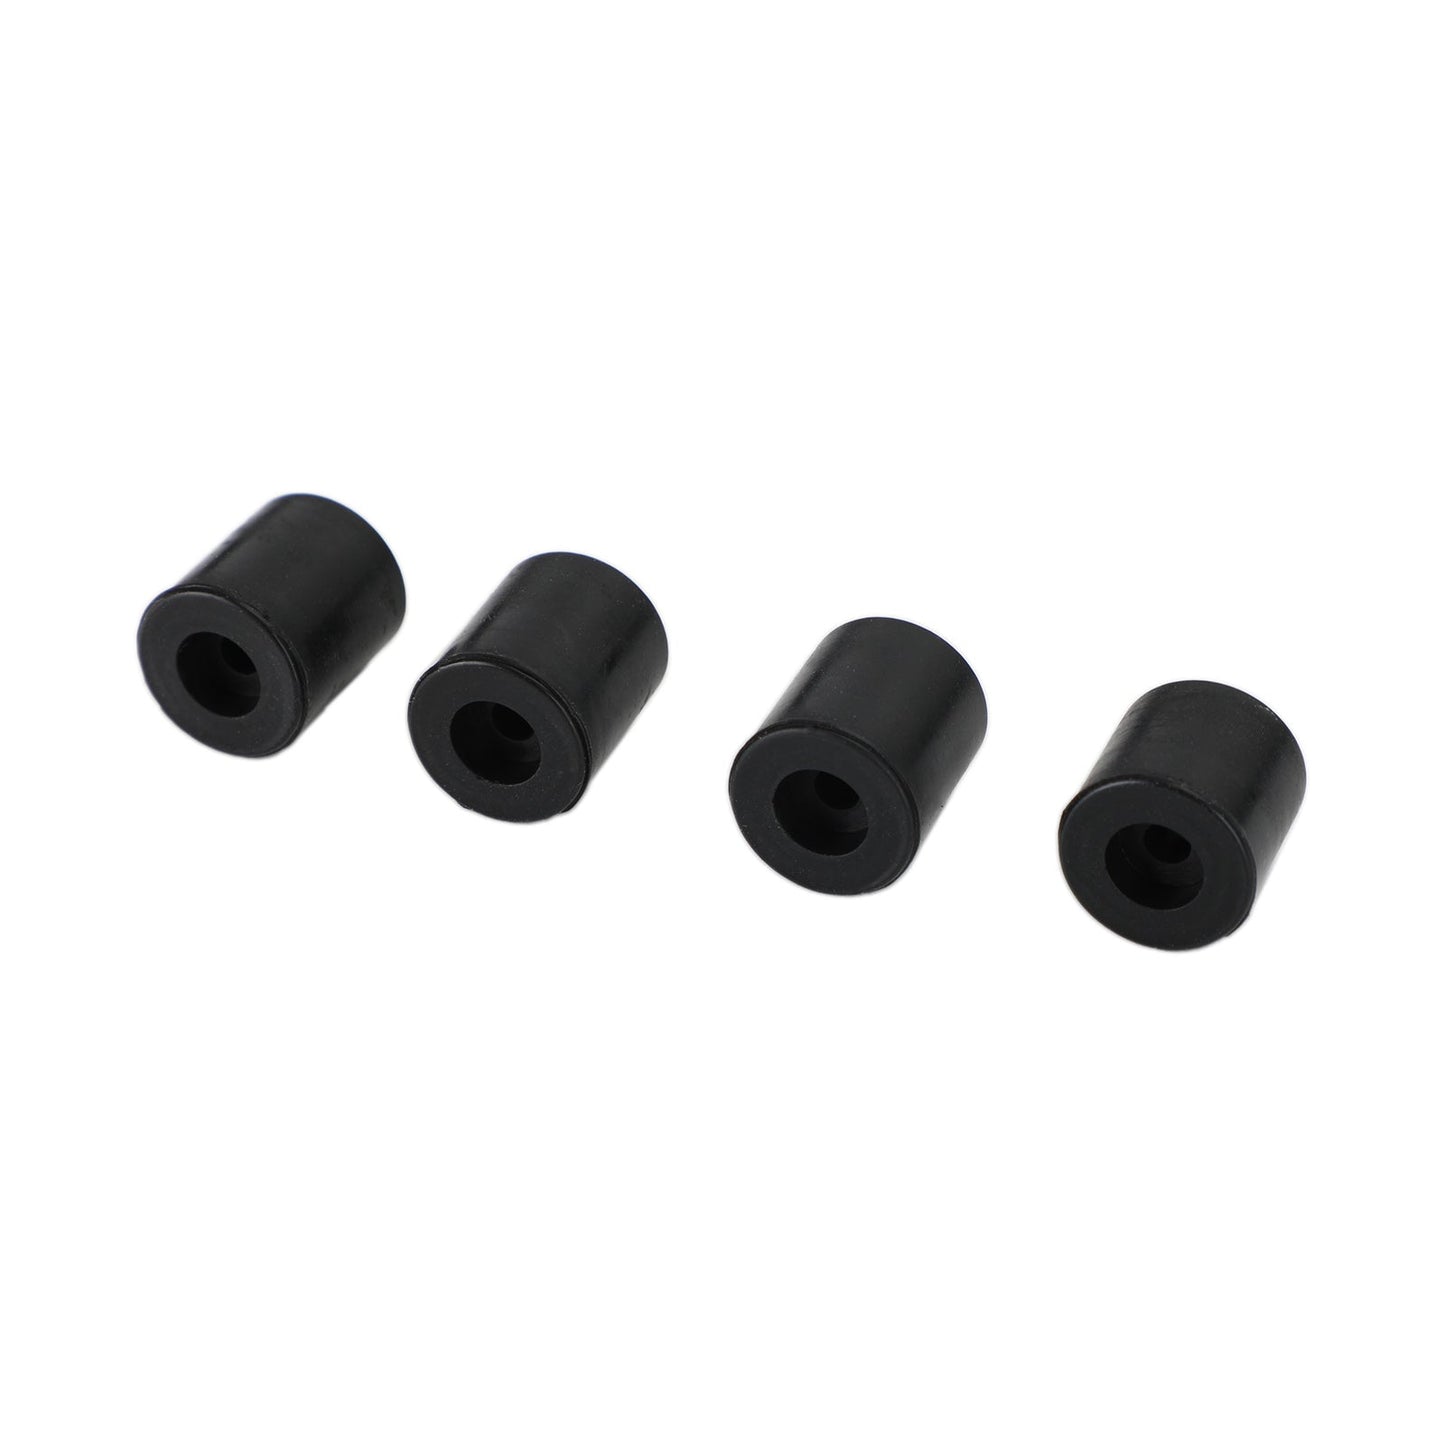 4pcs 3D Printer Silicone Bed Leveling Mount Column Spacer Auto Levelling Black